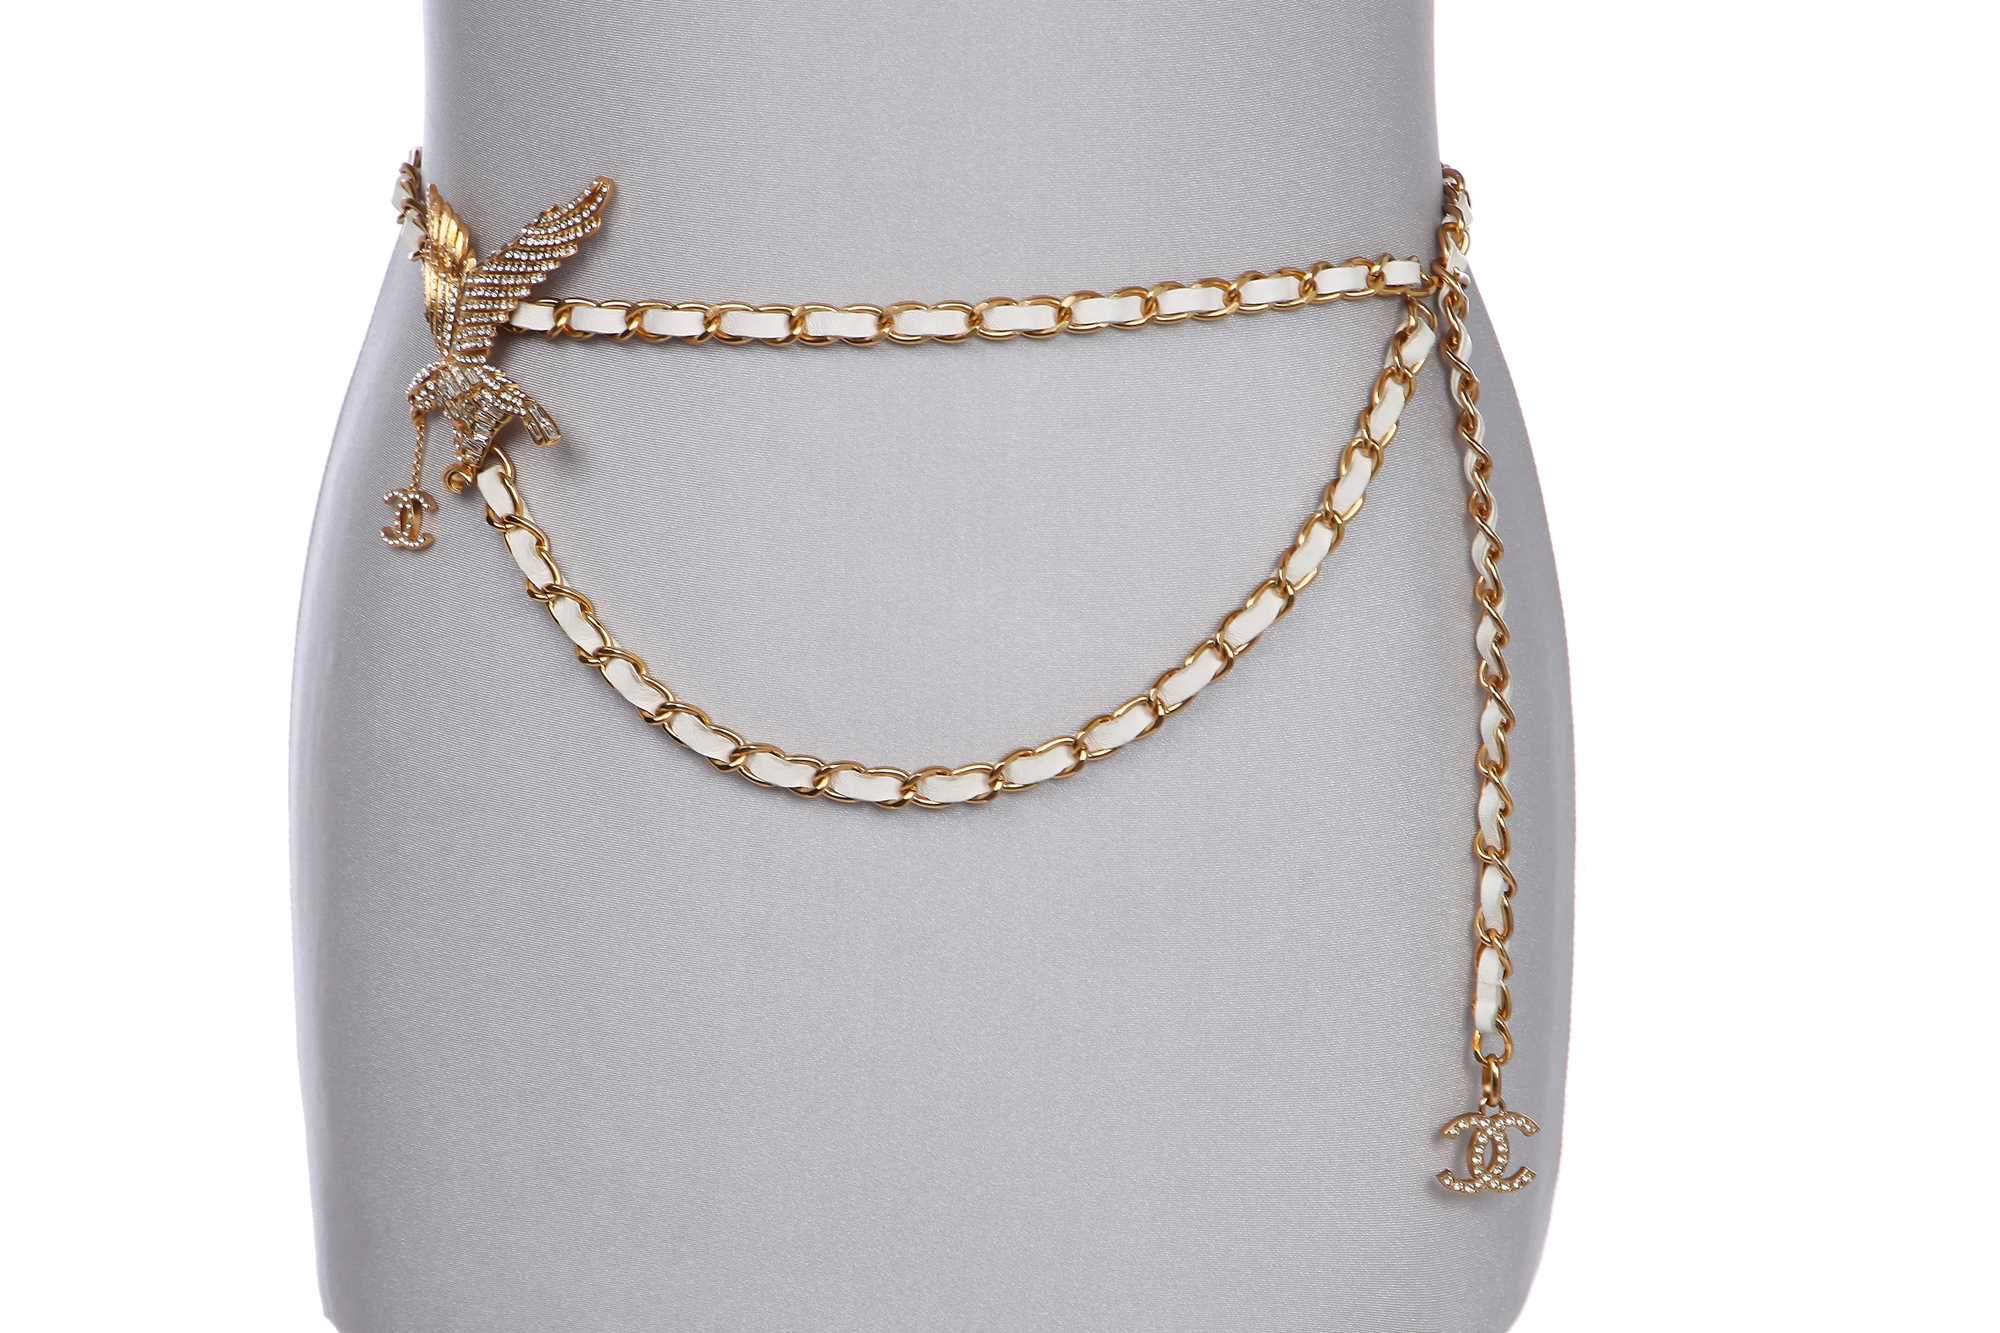 Lot 156 - A Chanel 'Eagle' woven leather chain belt, Spring-Summer 2001